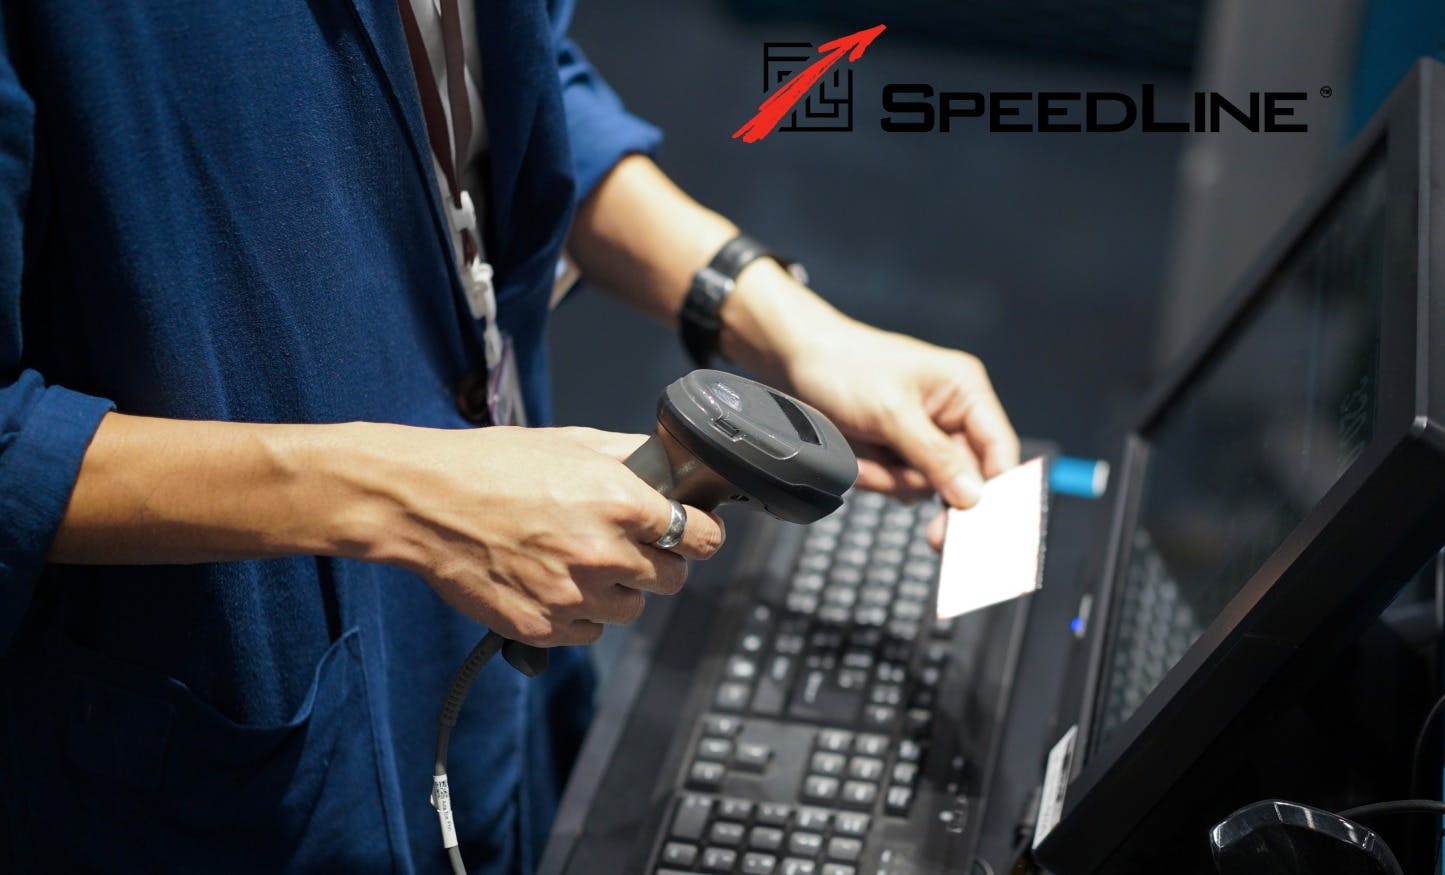 SpeedLine POS Review: Features, Prices, and Perks